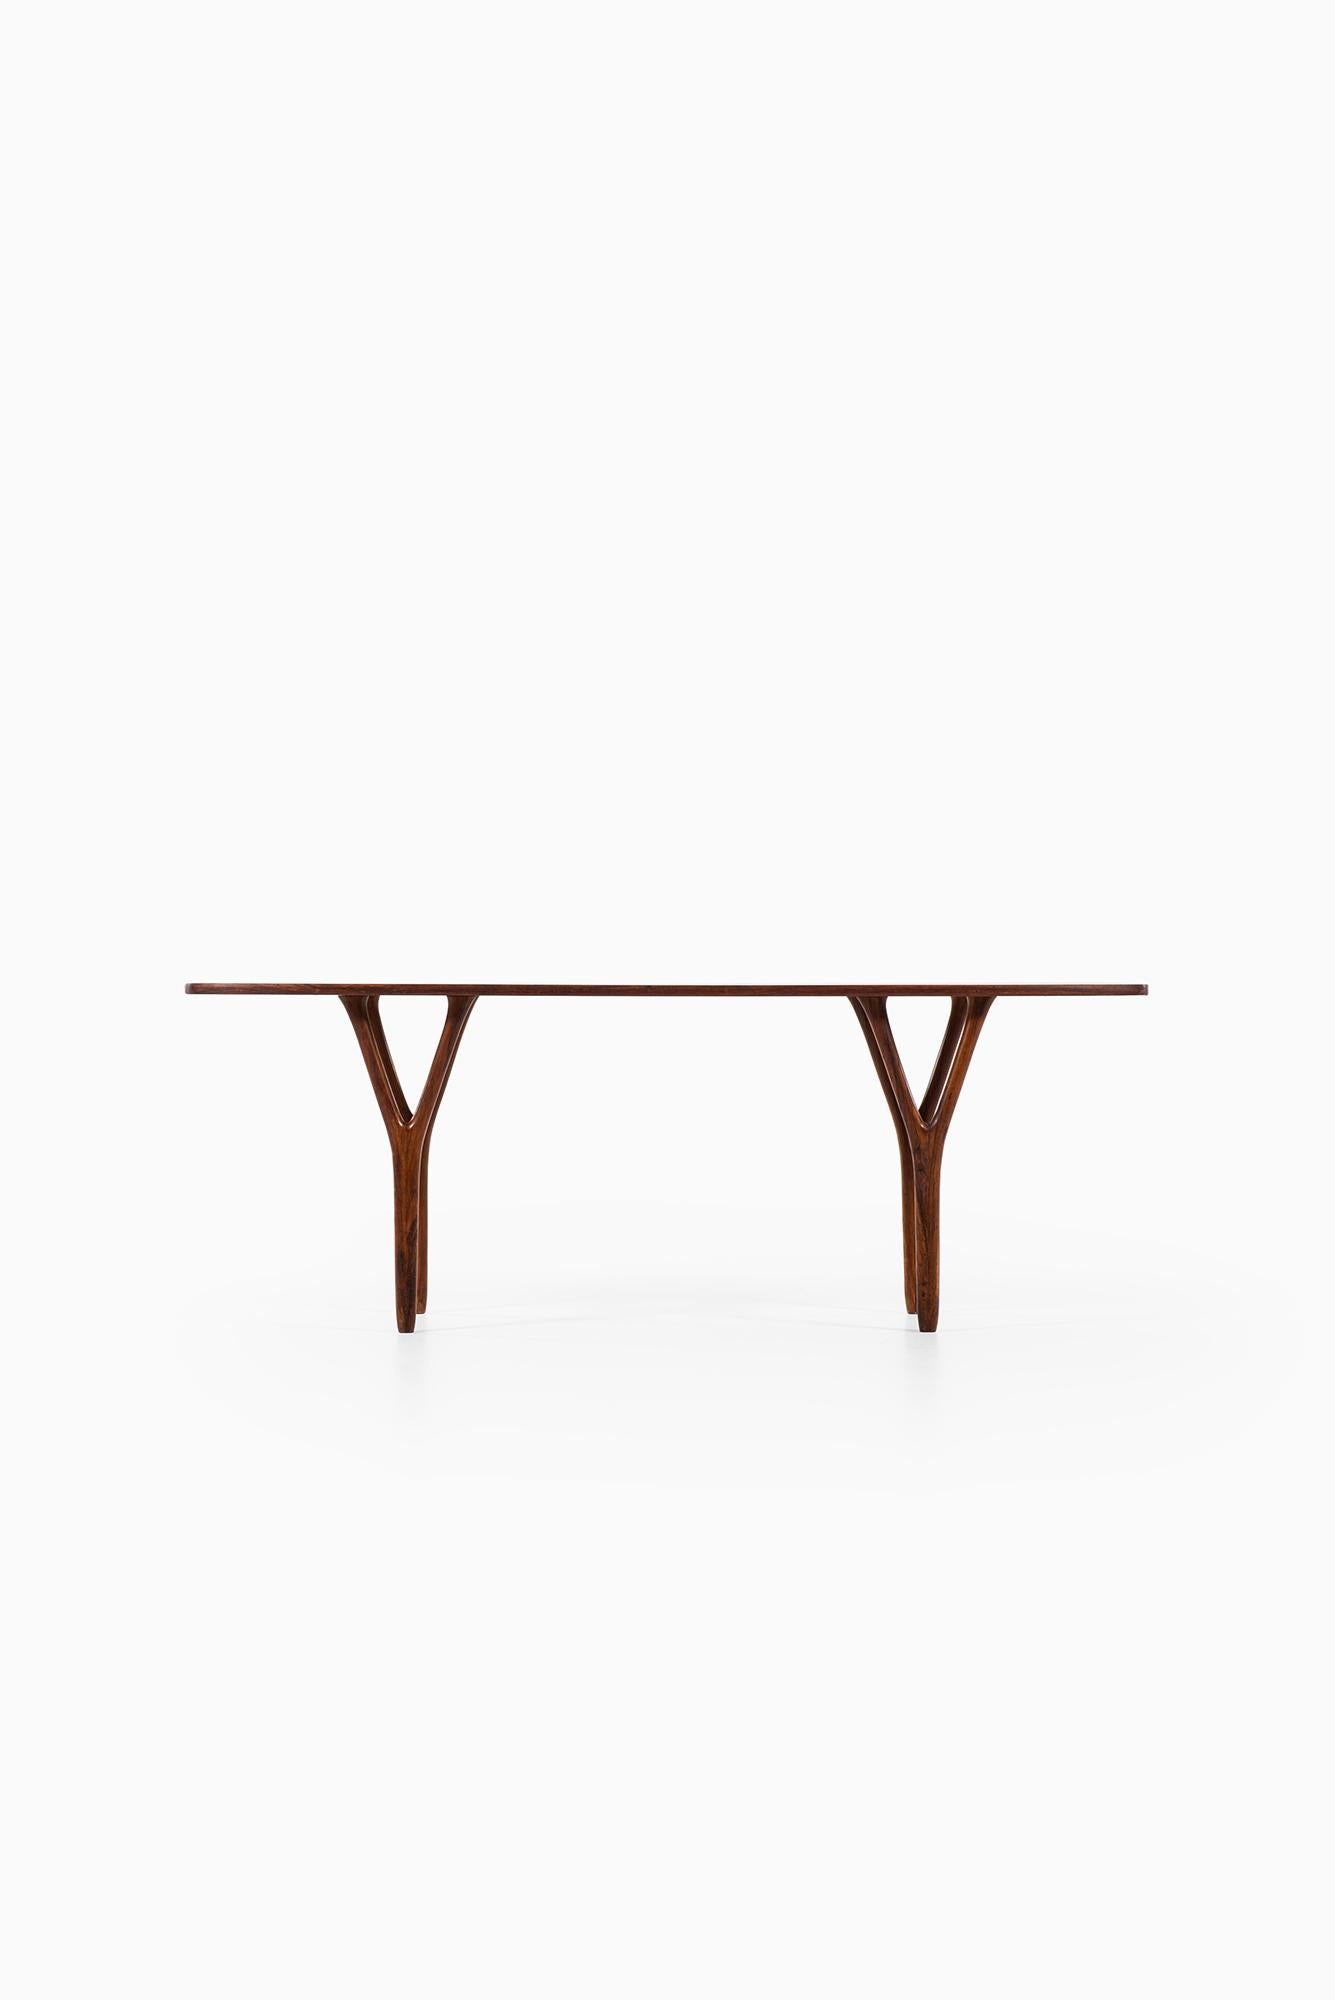 Rare coffee table in the style of Helge Vestergaard Jensen. Probably produced in Denmark.